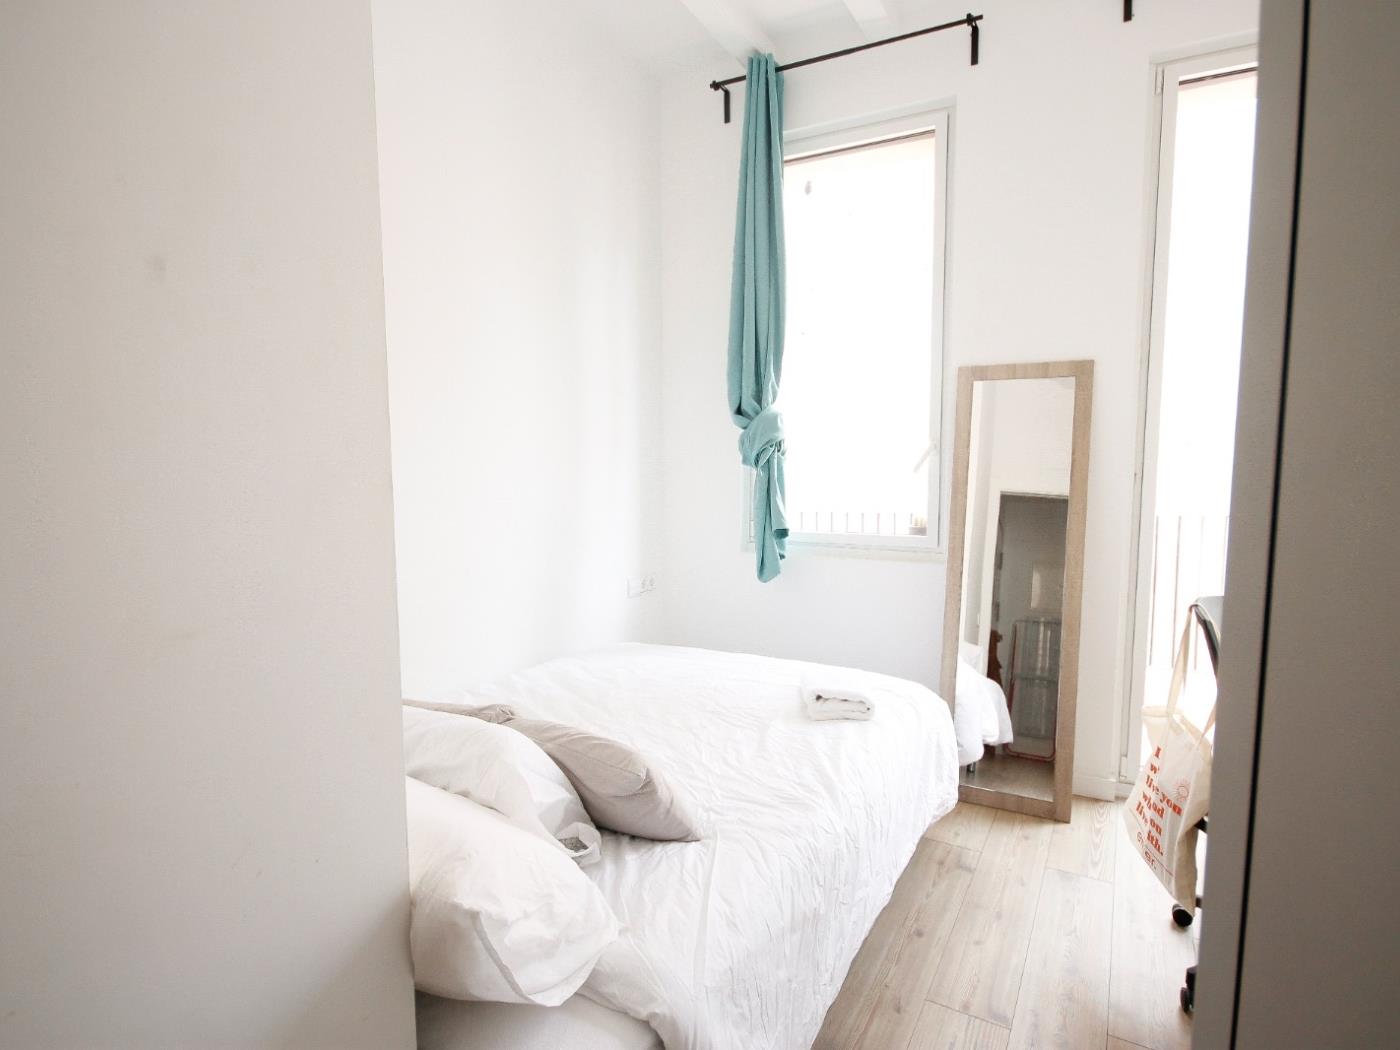 Room for rent near Paralel metro station - My Space Barcelona Apartments